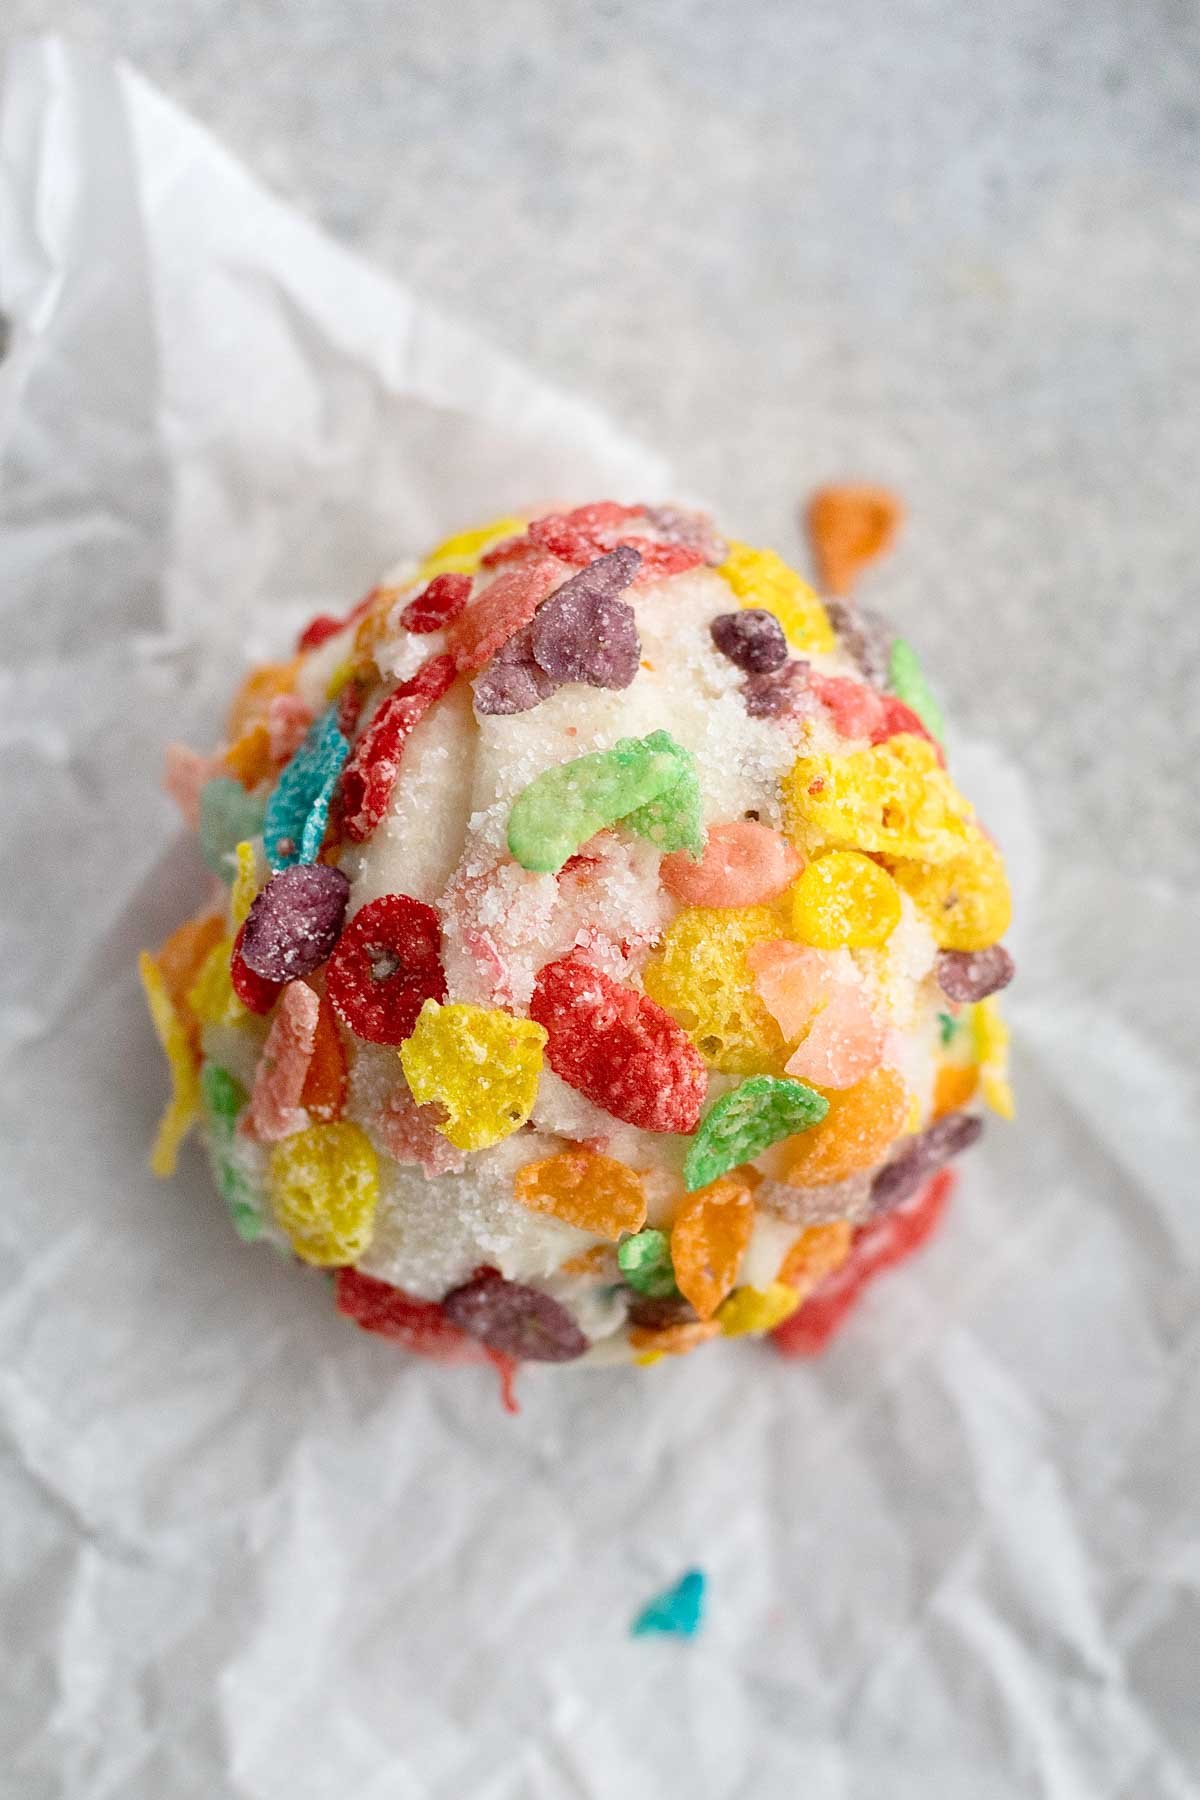 A ball of fruity pebbles cookie dough on wax paper.